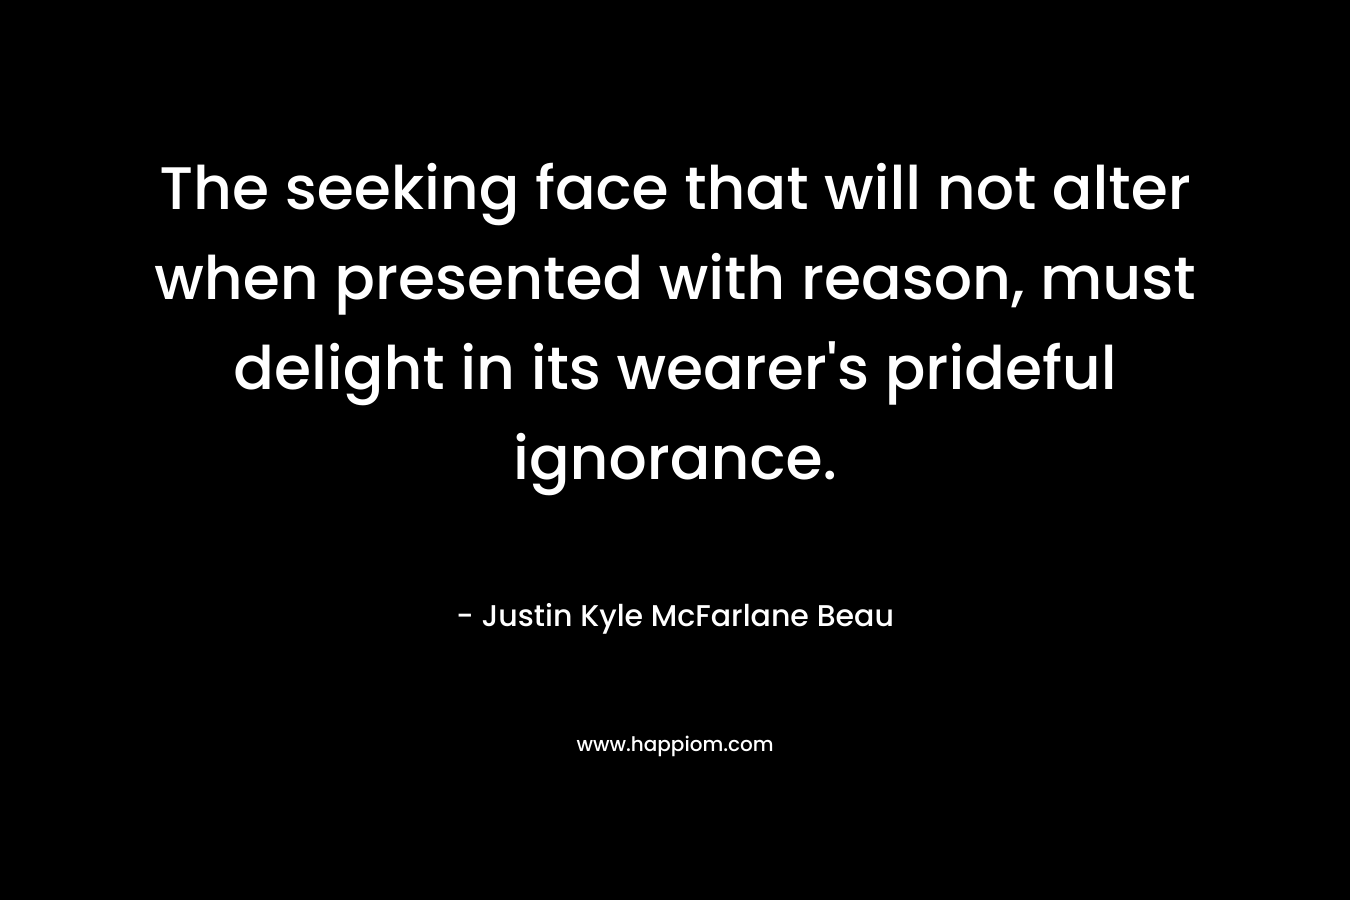 The seeking face that will not alter when presented with reason, must delight in its wearer’s prideful ignorance. – Justin Kyle McFarlane Beau